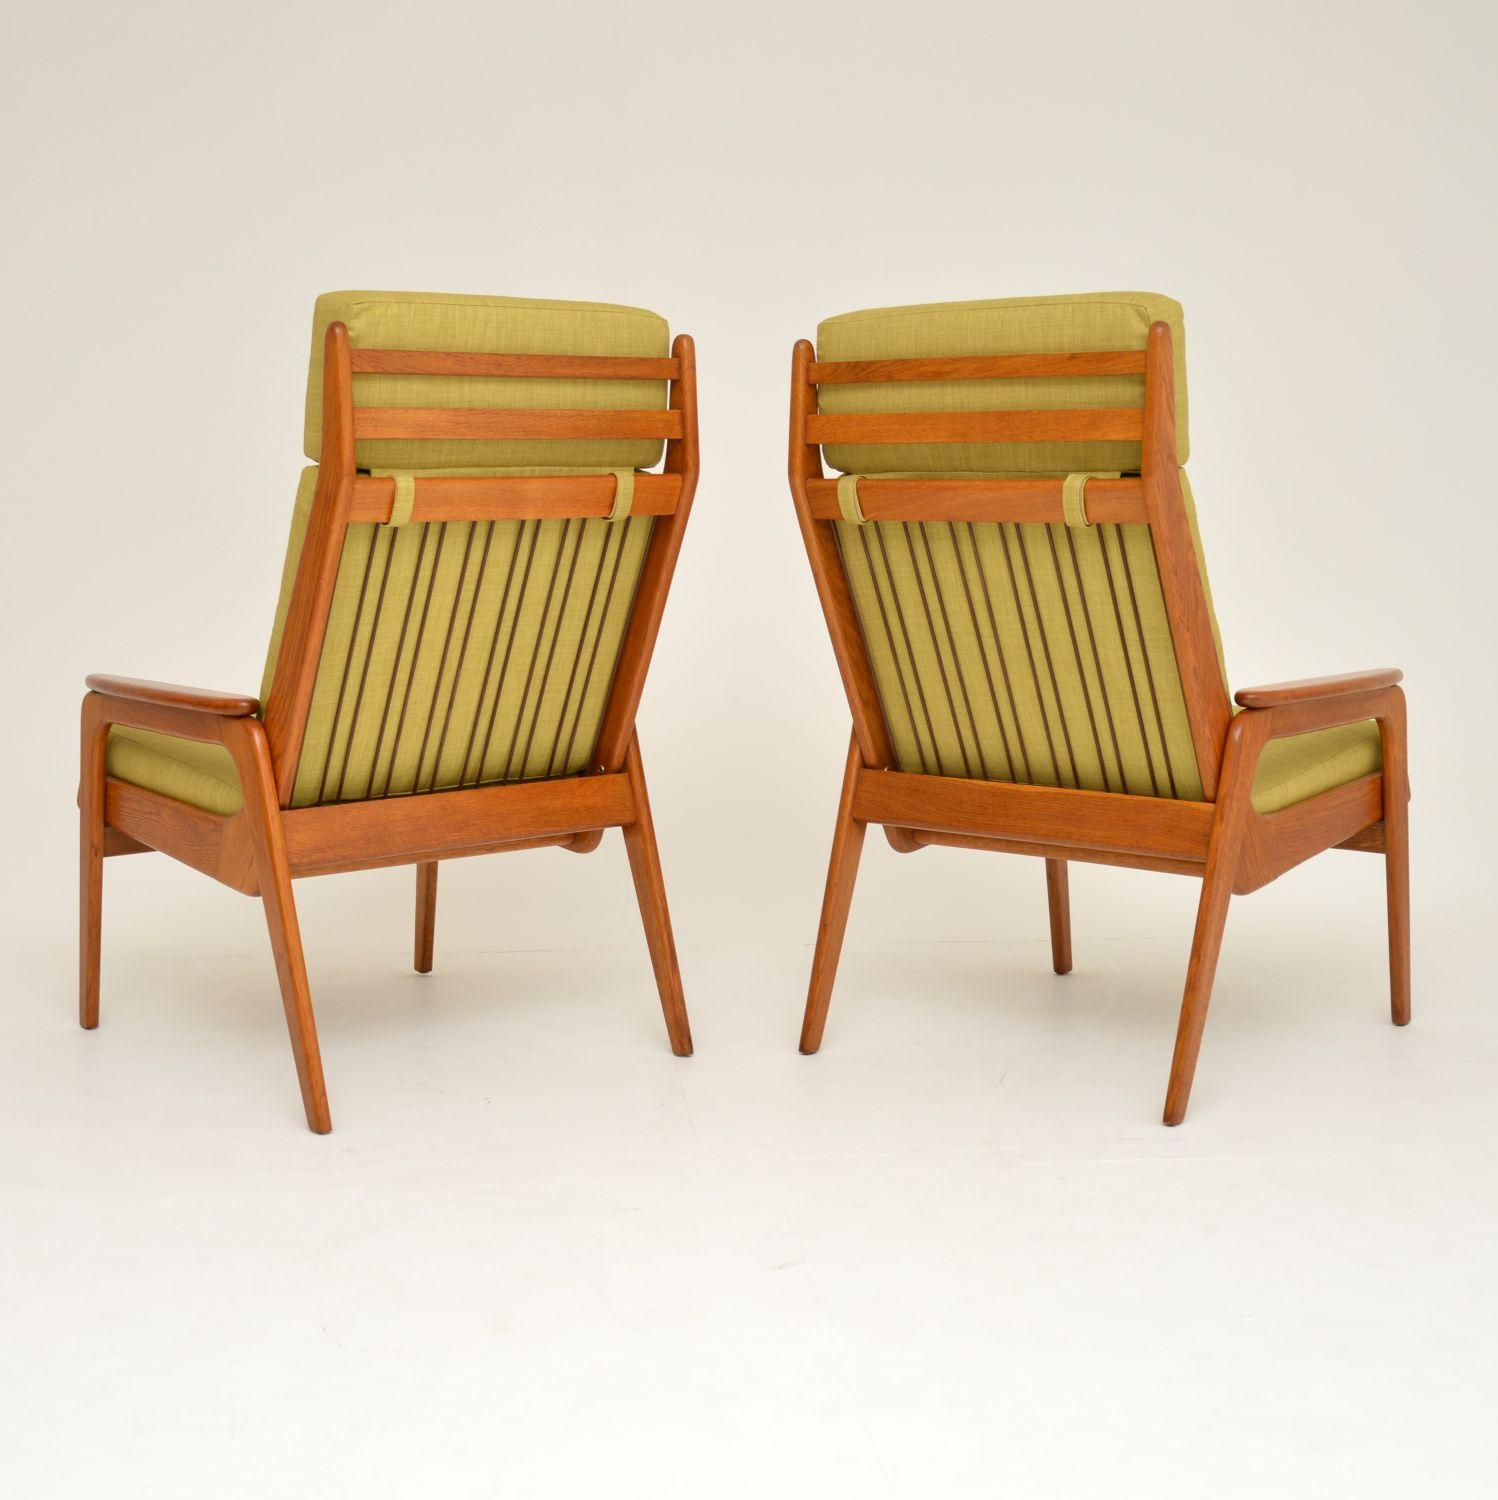 A beautiful pair of vintage armchairs, made in Holland in the 1960s. They are of amazing quality, with solid oak frames and solid teak armrests. These are extremely comfortable, and are in superb condition. We have had the frames fully stripped and